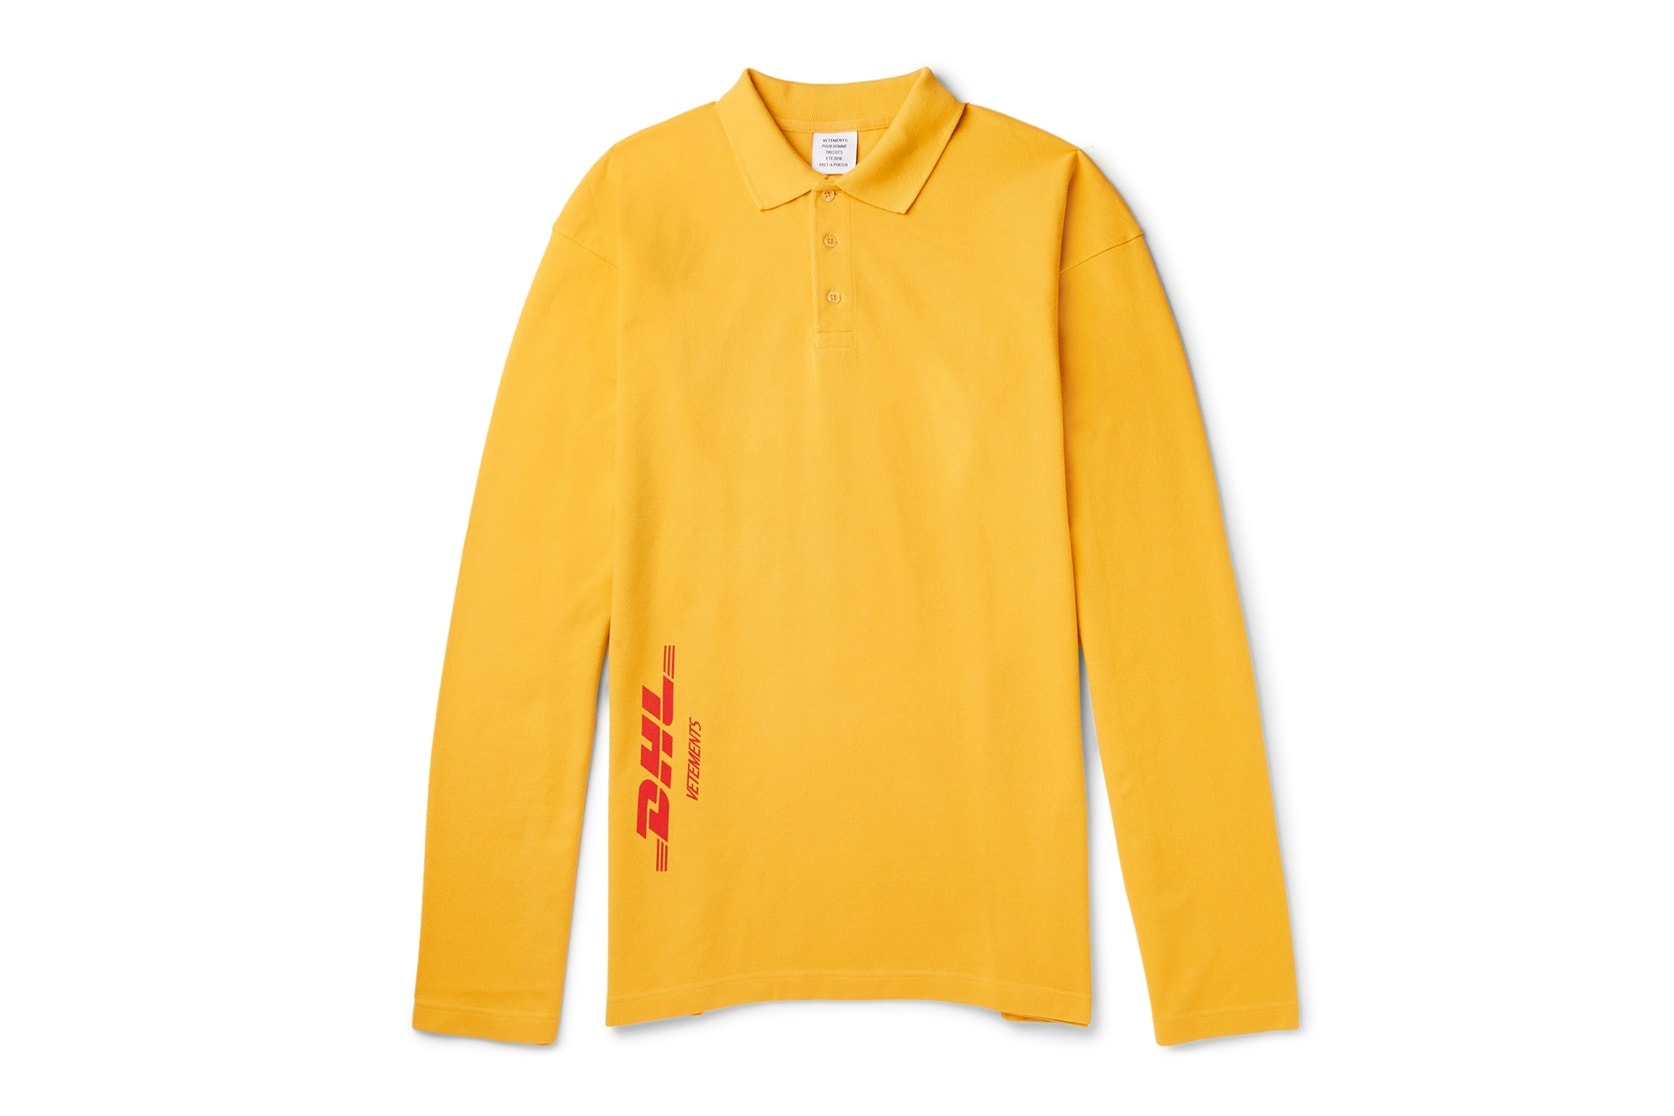 Vetements DHL Spring Summer 2018 Capsule Collection Polo Long Sleeve Shirt Yellow